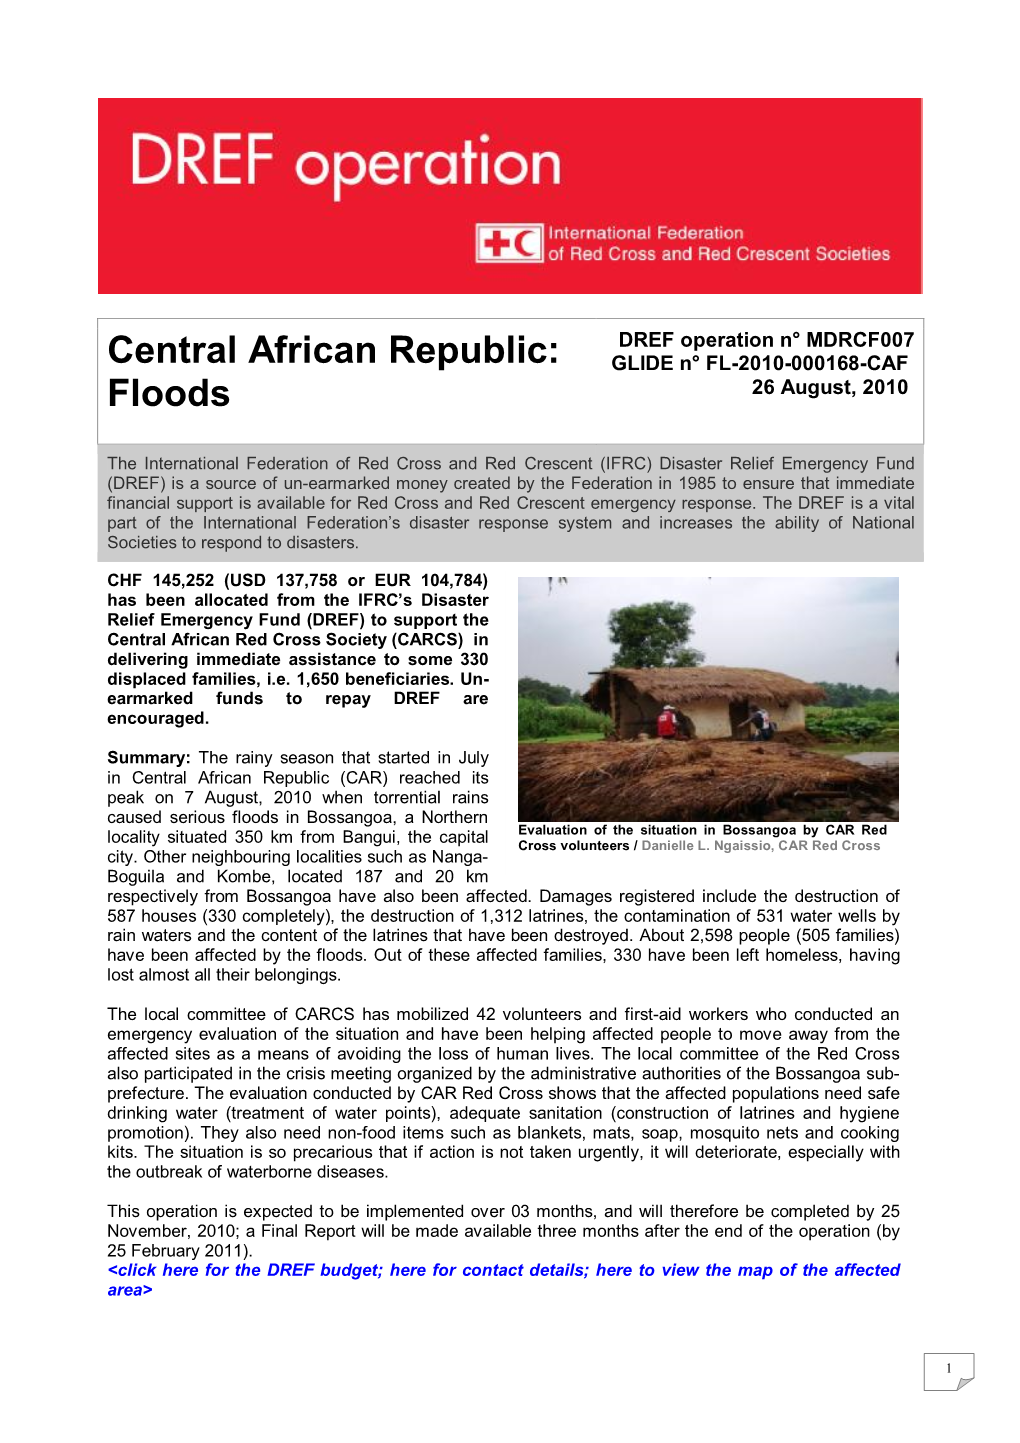 Central African Republic: Floods